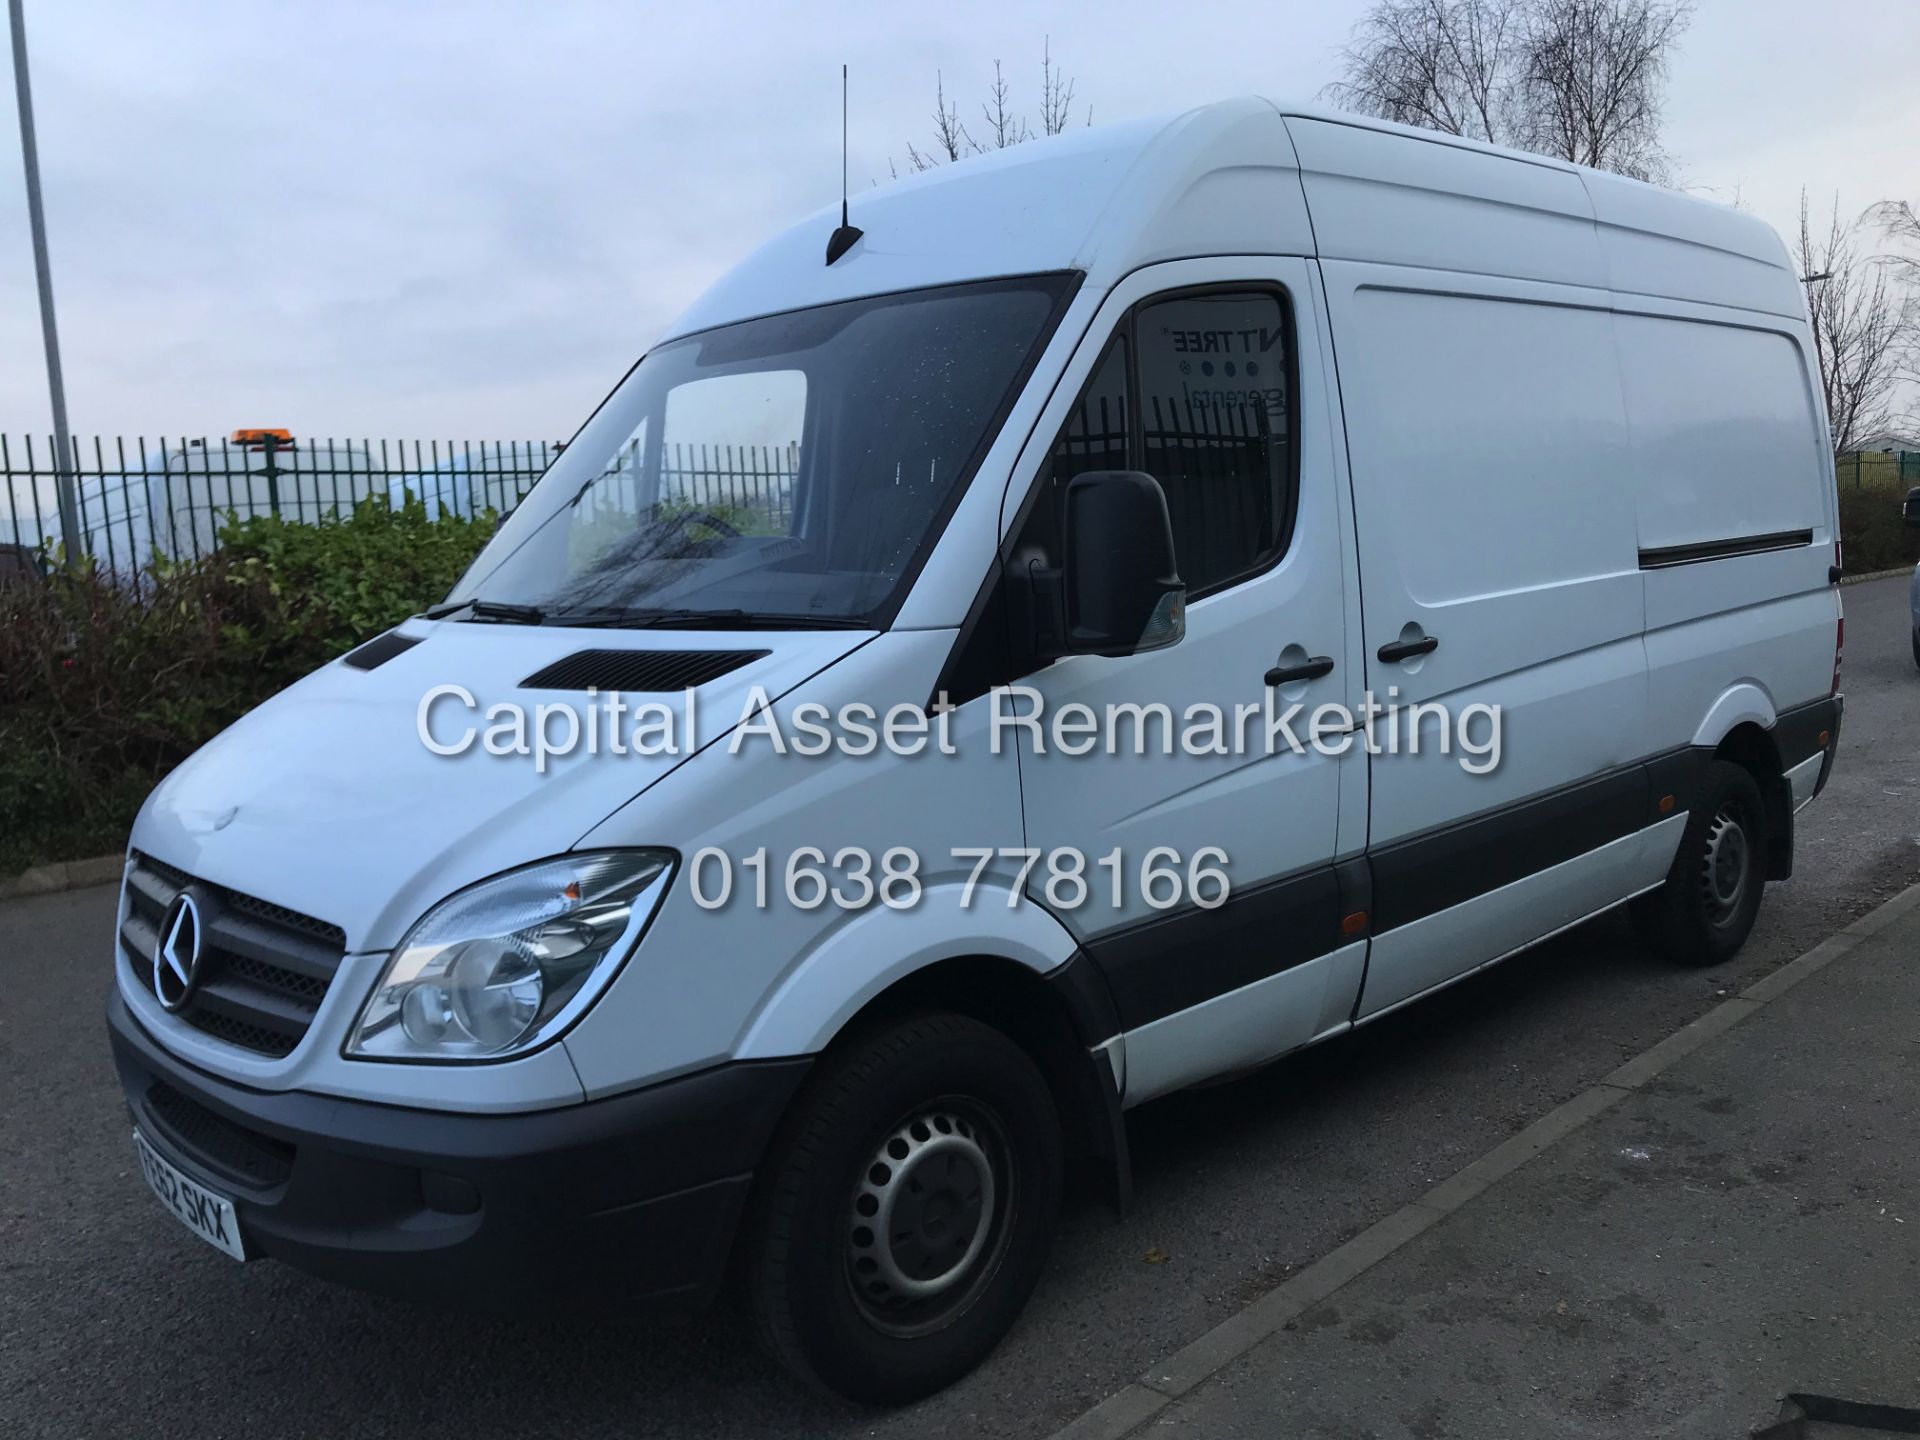 (ON SALE) MERCEDES SPRINTER 2.2CDI MWB / HIGH ROOF (2013 MODEL) 1 OWNER - LOW MILES - Image 3 of 15